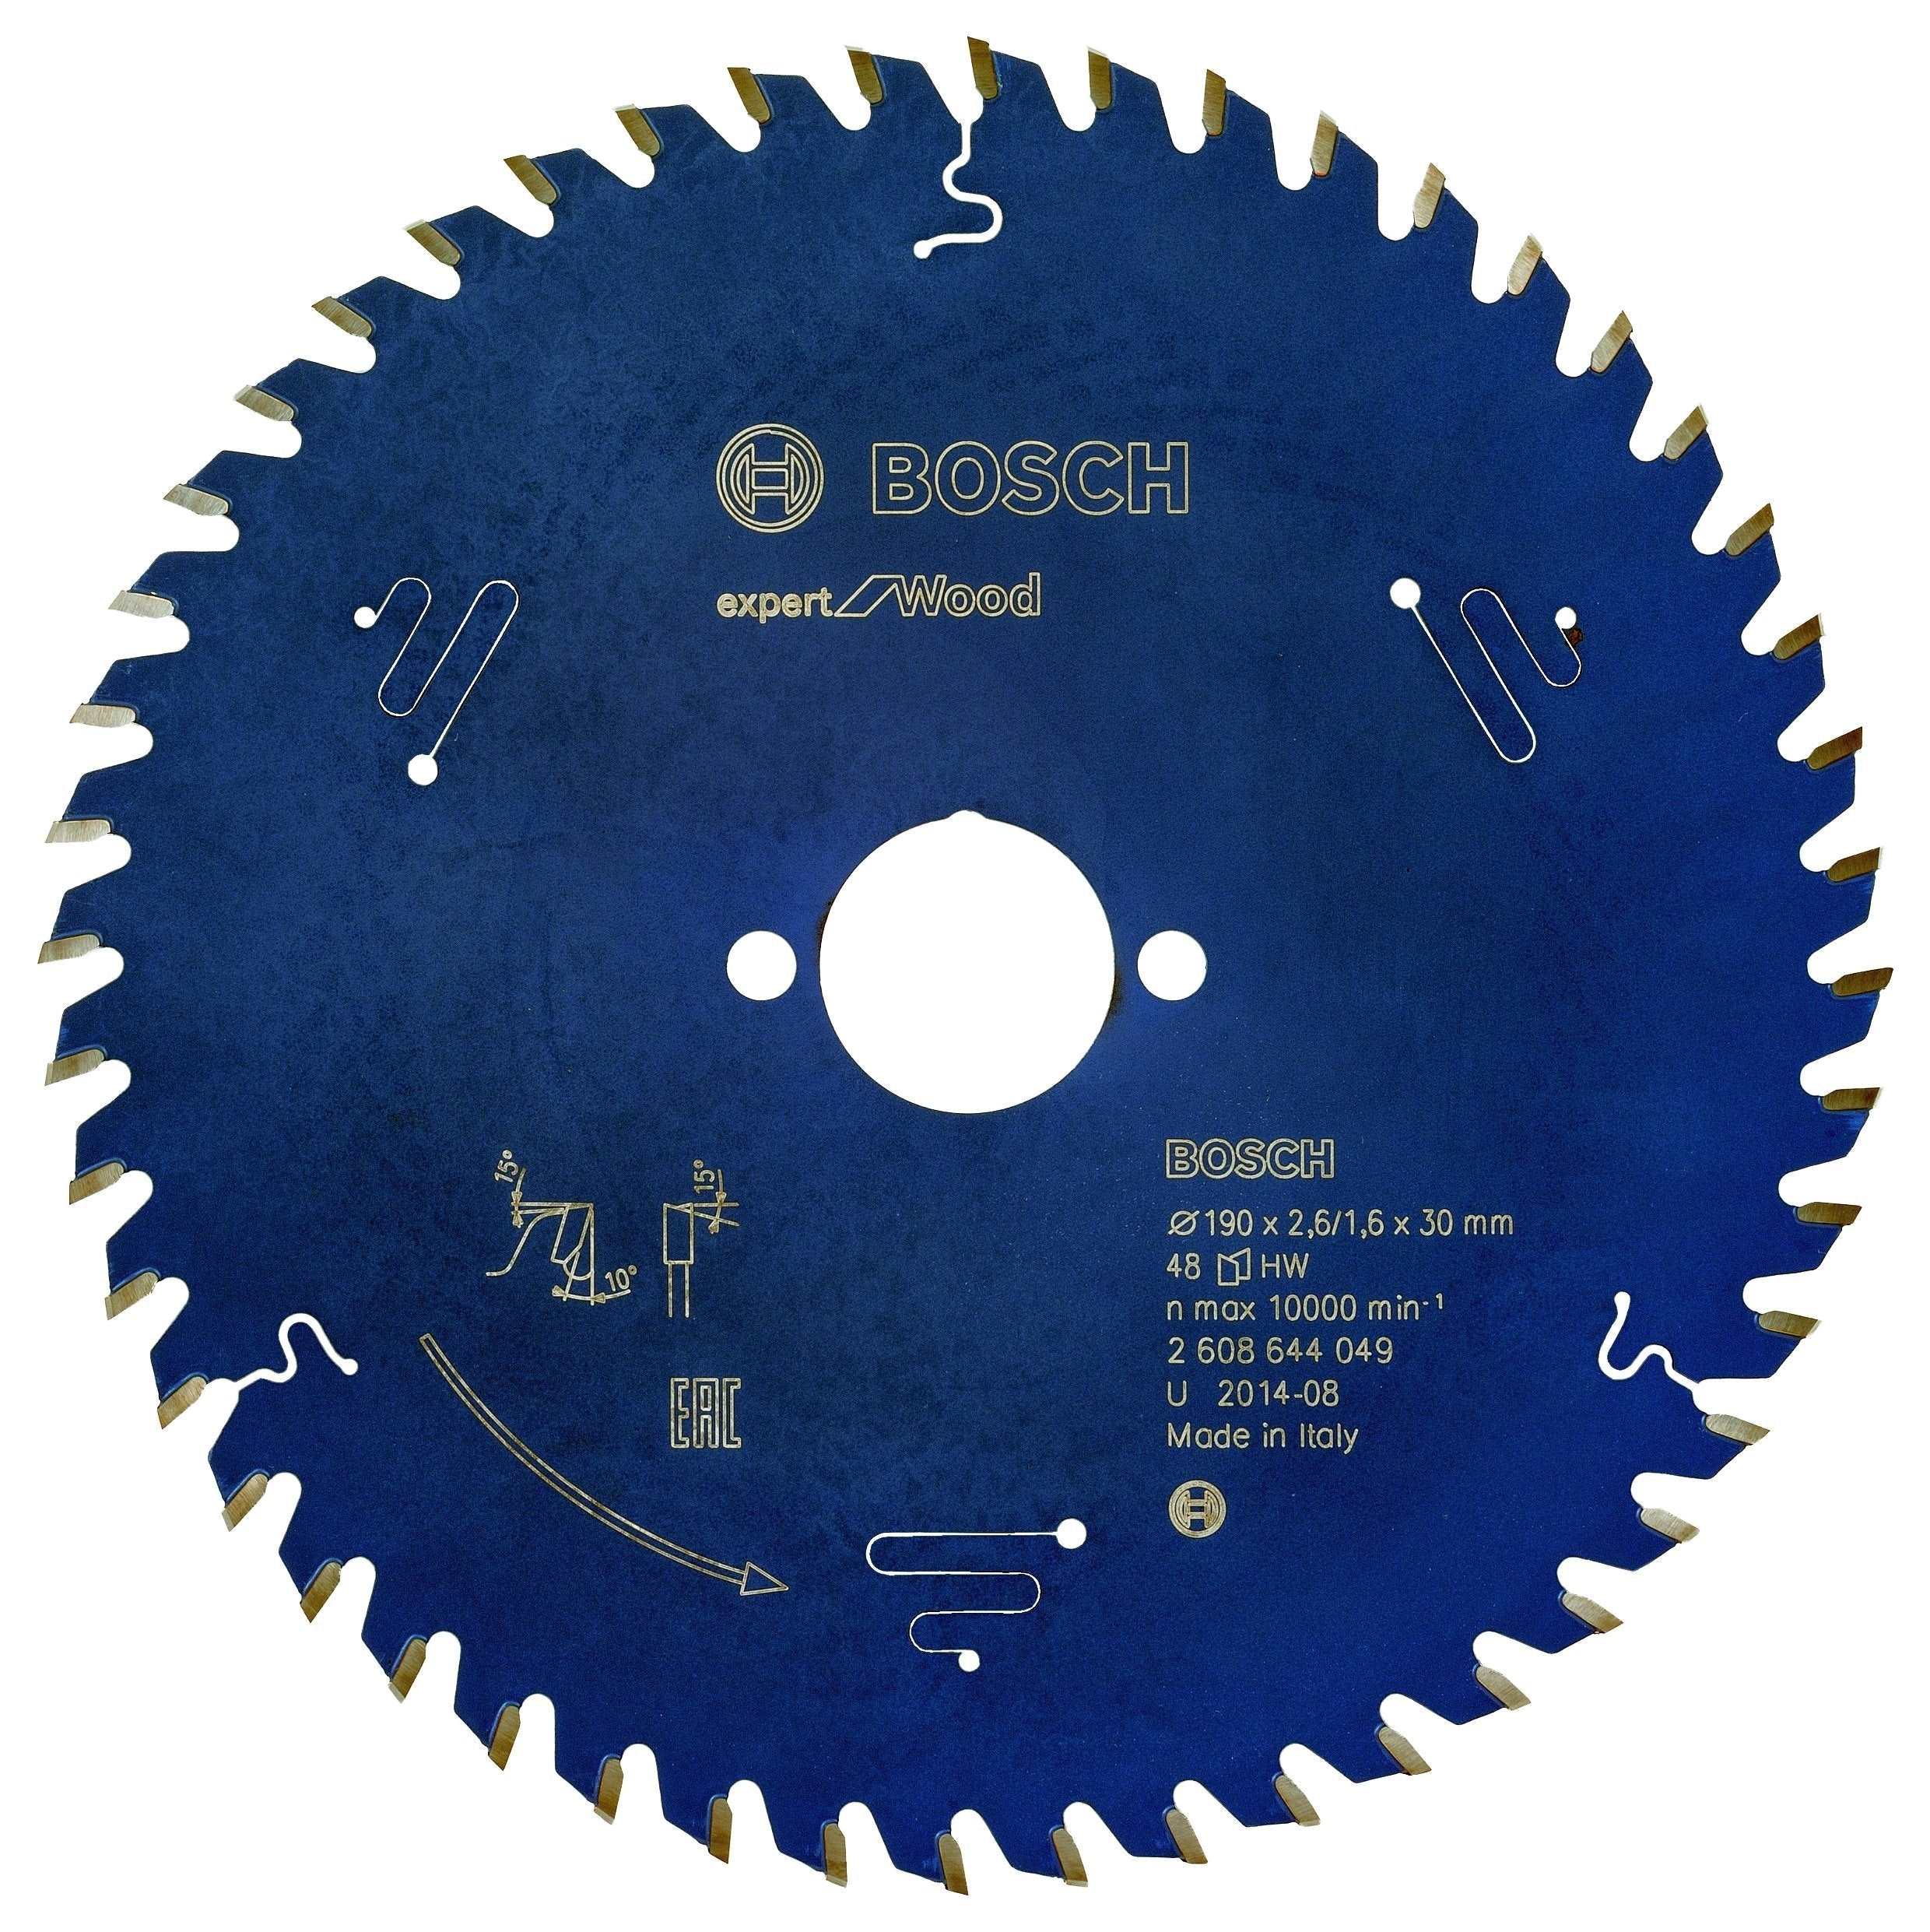 Bosch Expert Circular Saw Blade for Wood 190 x 30 x 2,6 mm, 48 2608644049 Power Tool Services